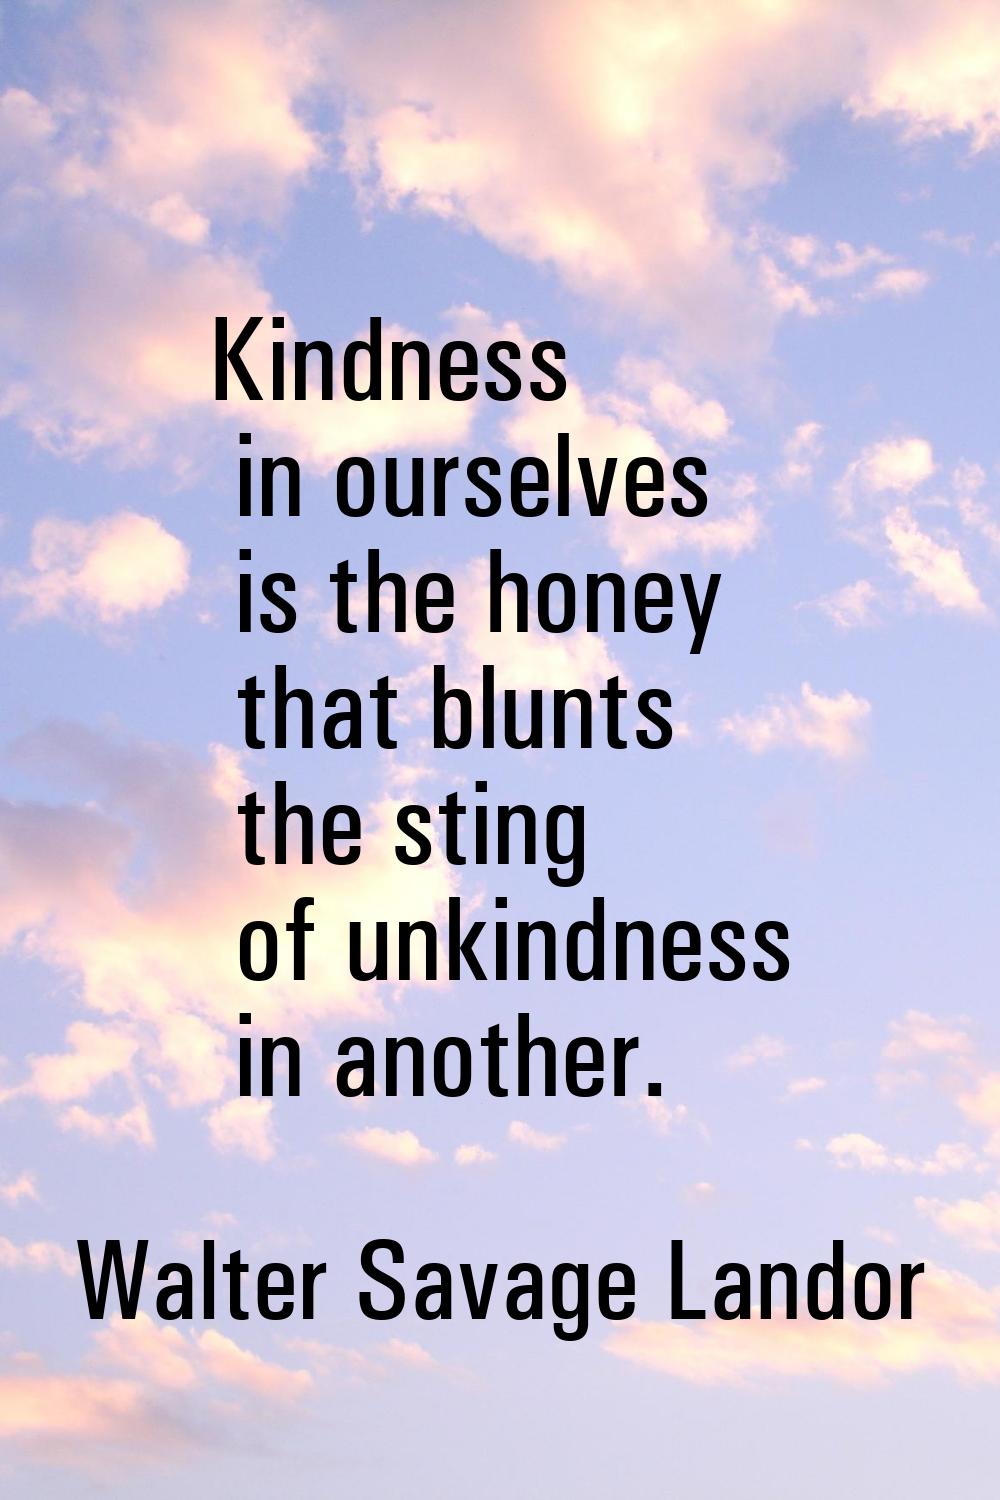 Kindness in ourselves is the honey that blunts the sting of unkindness in another.